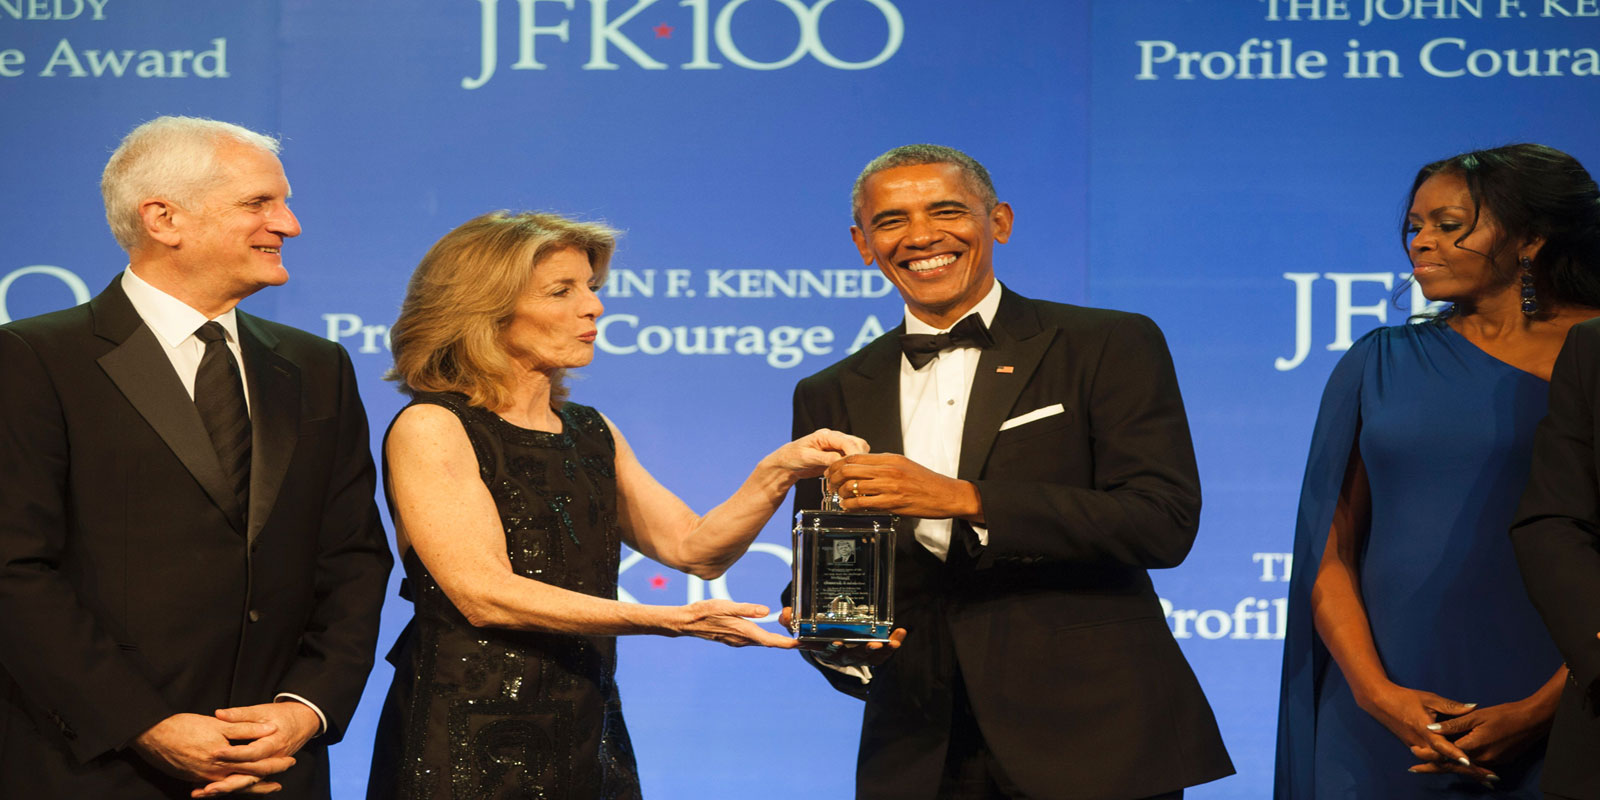 Former president Barack Obama receives the 2017 John F. Kennedy Profile in Courage Award from Caroline Kennedy Schlossberg (2nd-L) on May 7, 2017 at the JFK Library in Boston, Massachusetts. (AFP)